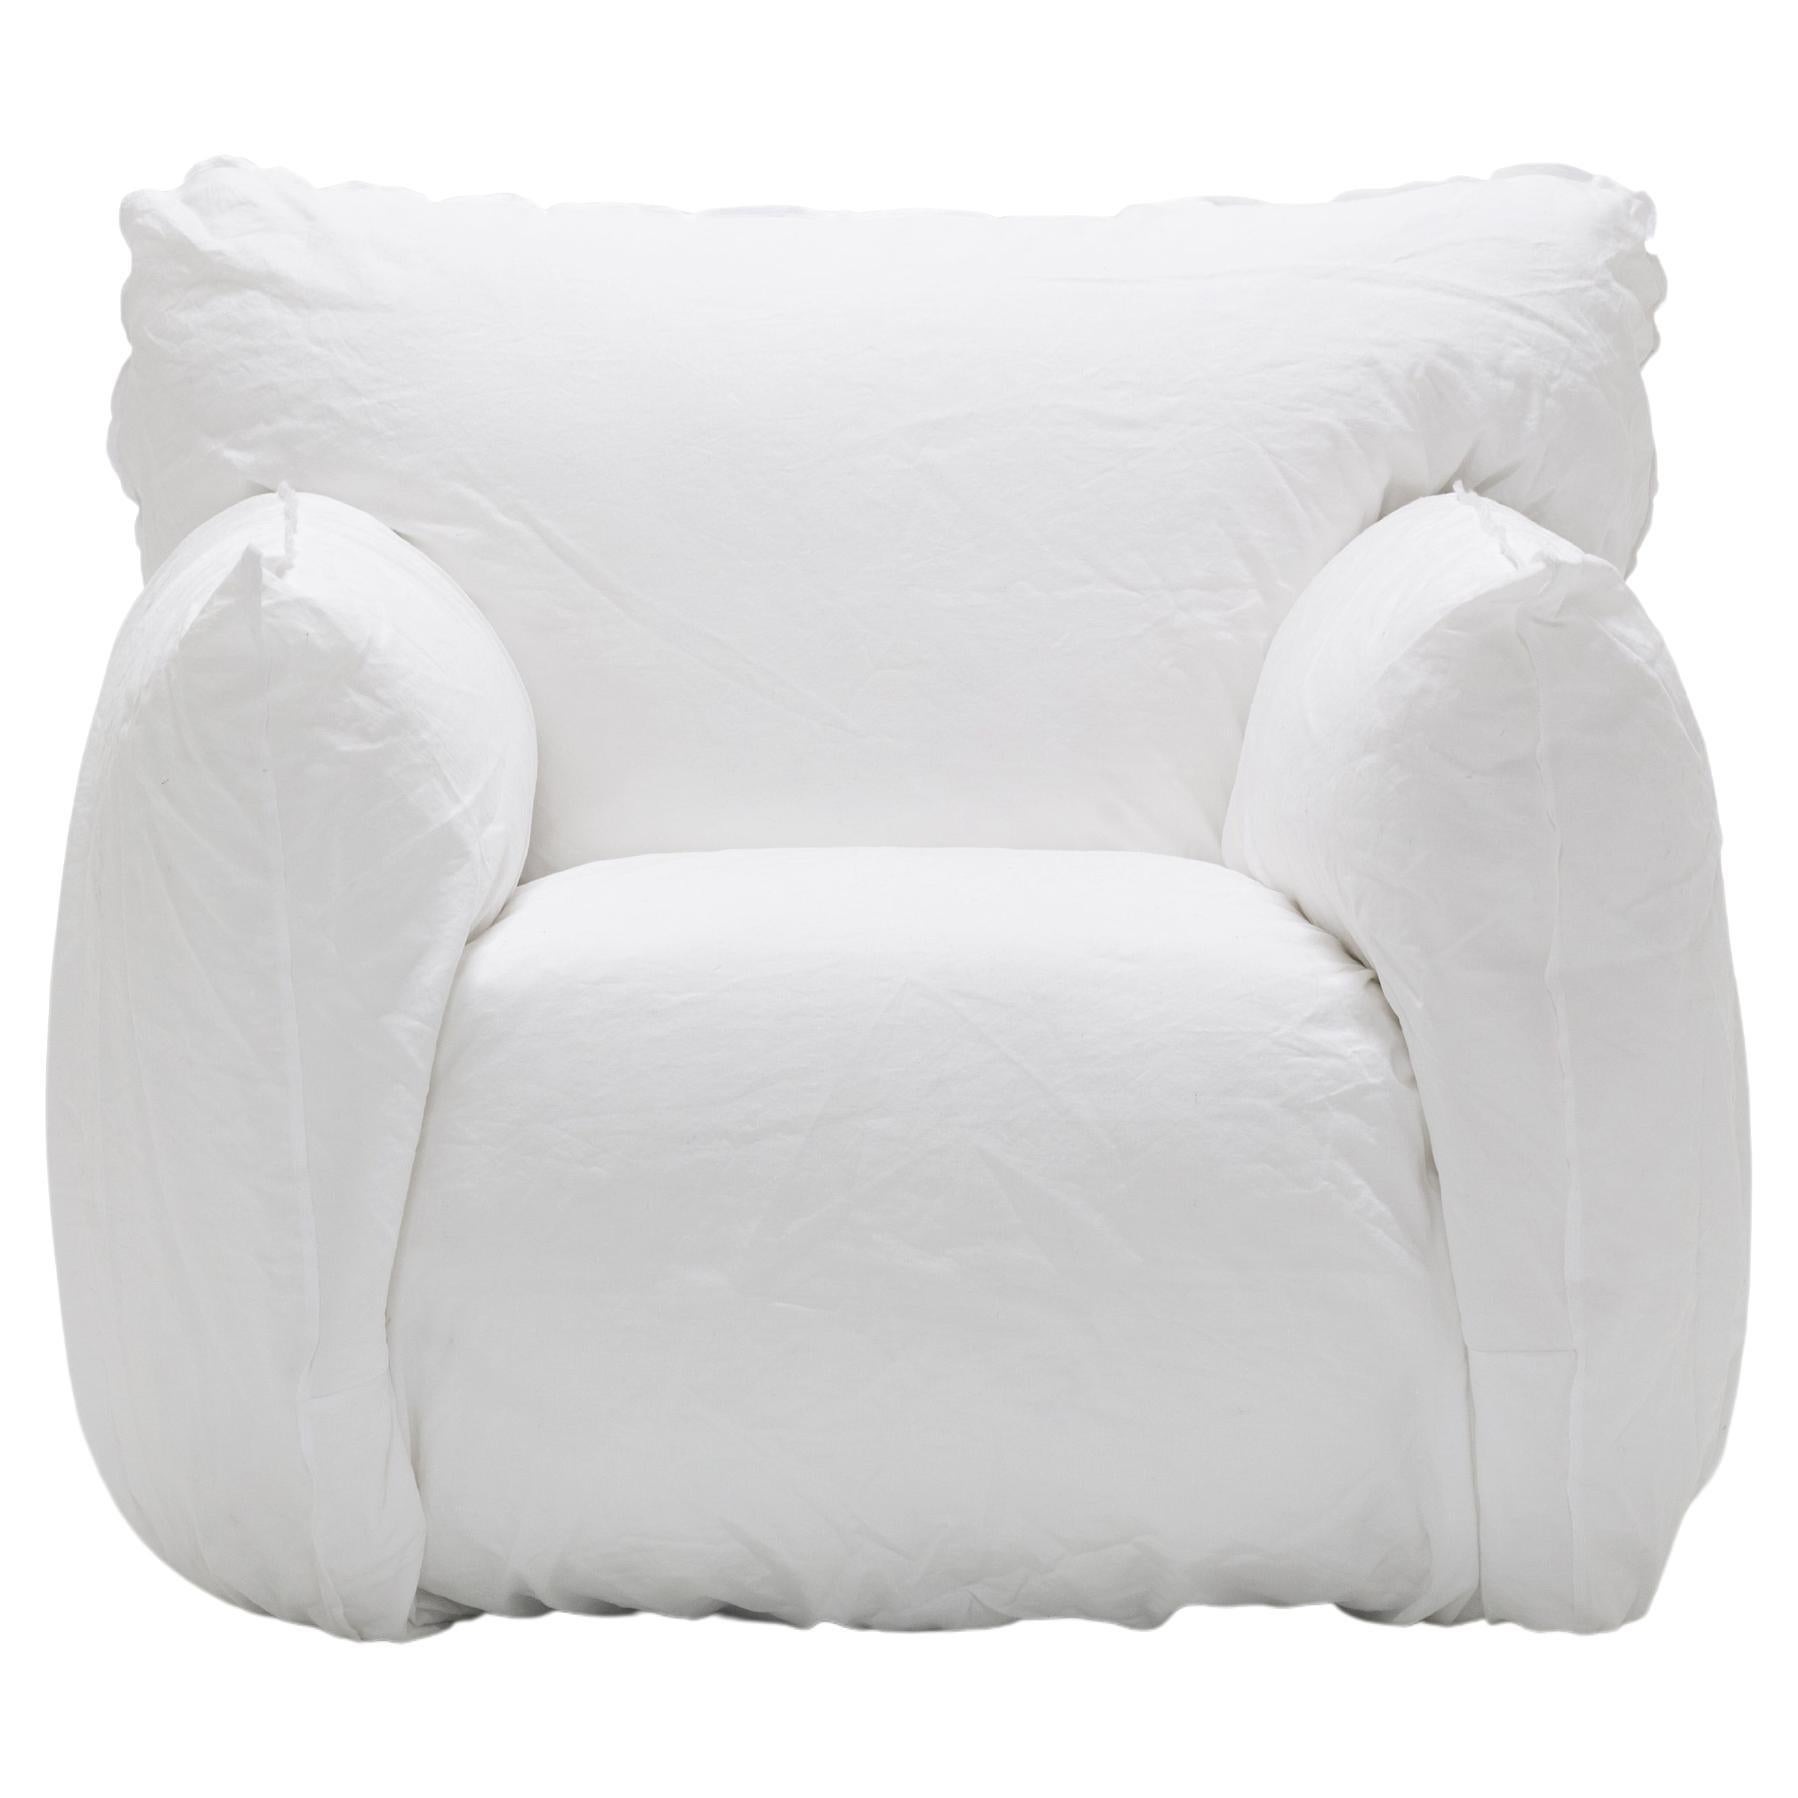 Gervasoni Nuvola 05 Lounge Chair in White Linen Upholstery by Paola Navone